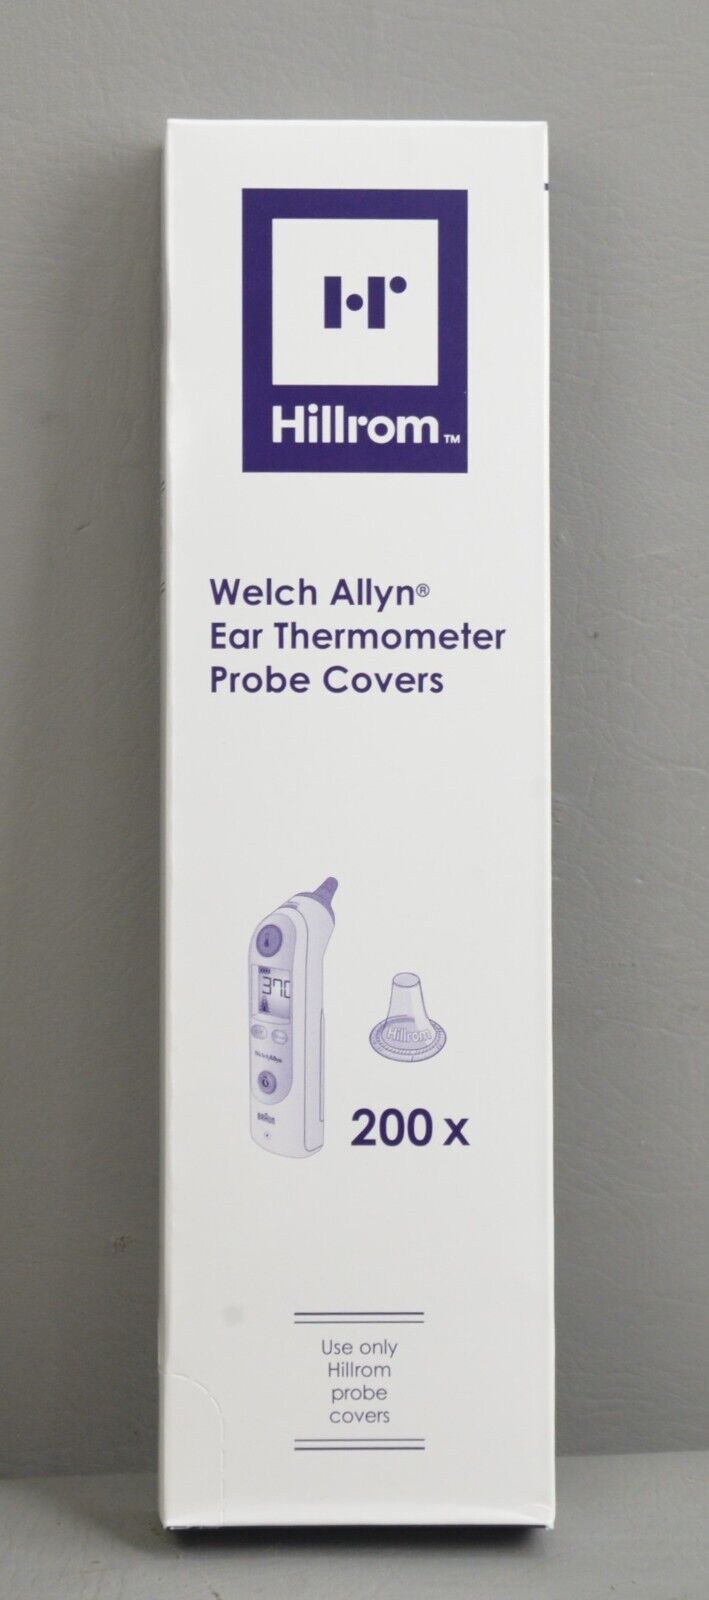 https://www.rhinotradellc.com/wp-content/uploads/imported/9/Case-of-25-Hillrom-Welch-Allyn-Ear-Thermometer-Probe-Covers-06000-005-256056432129-6.jpg